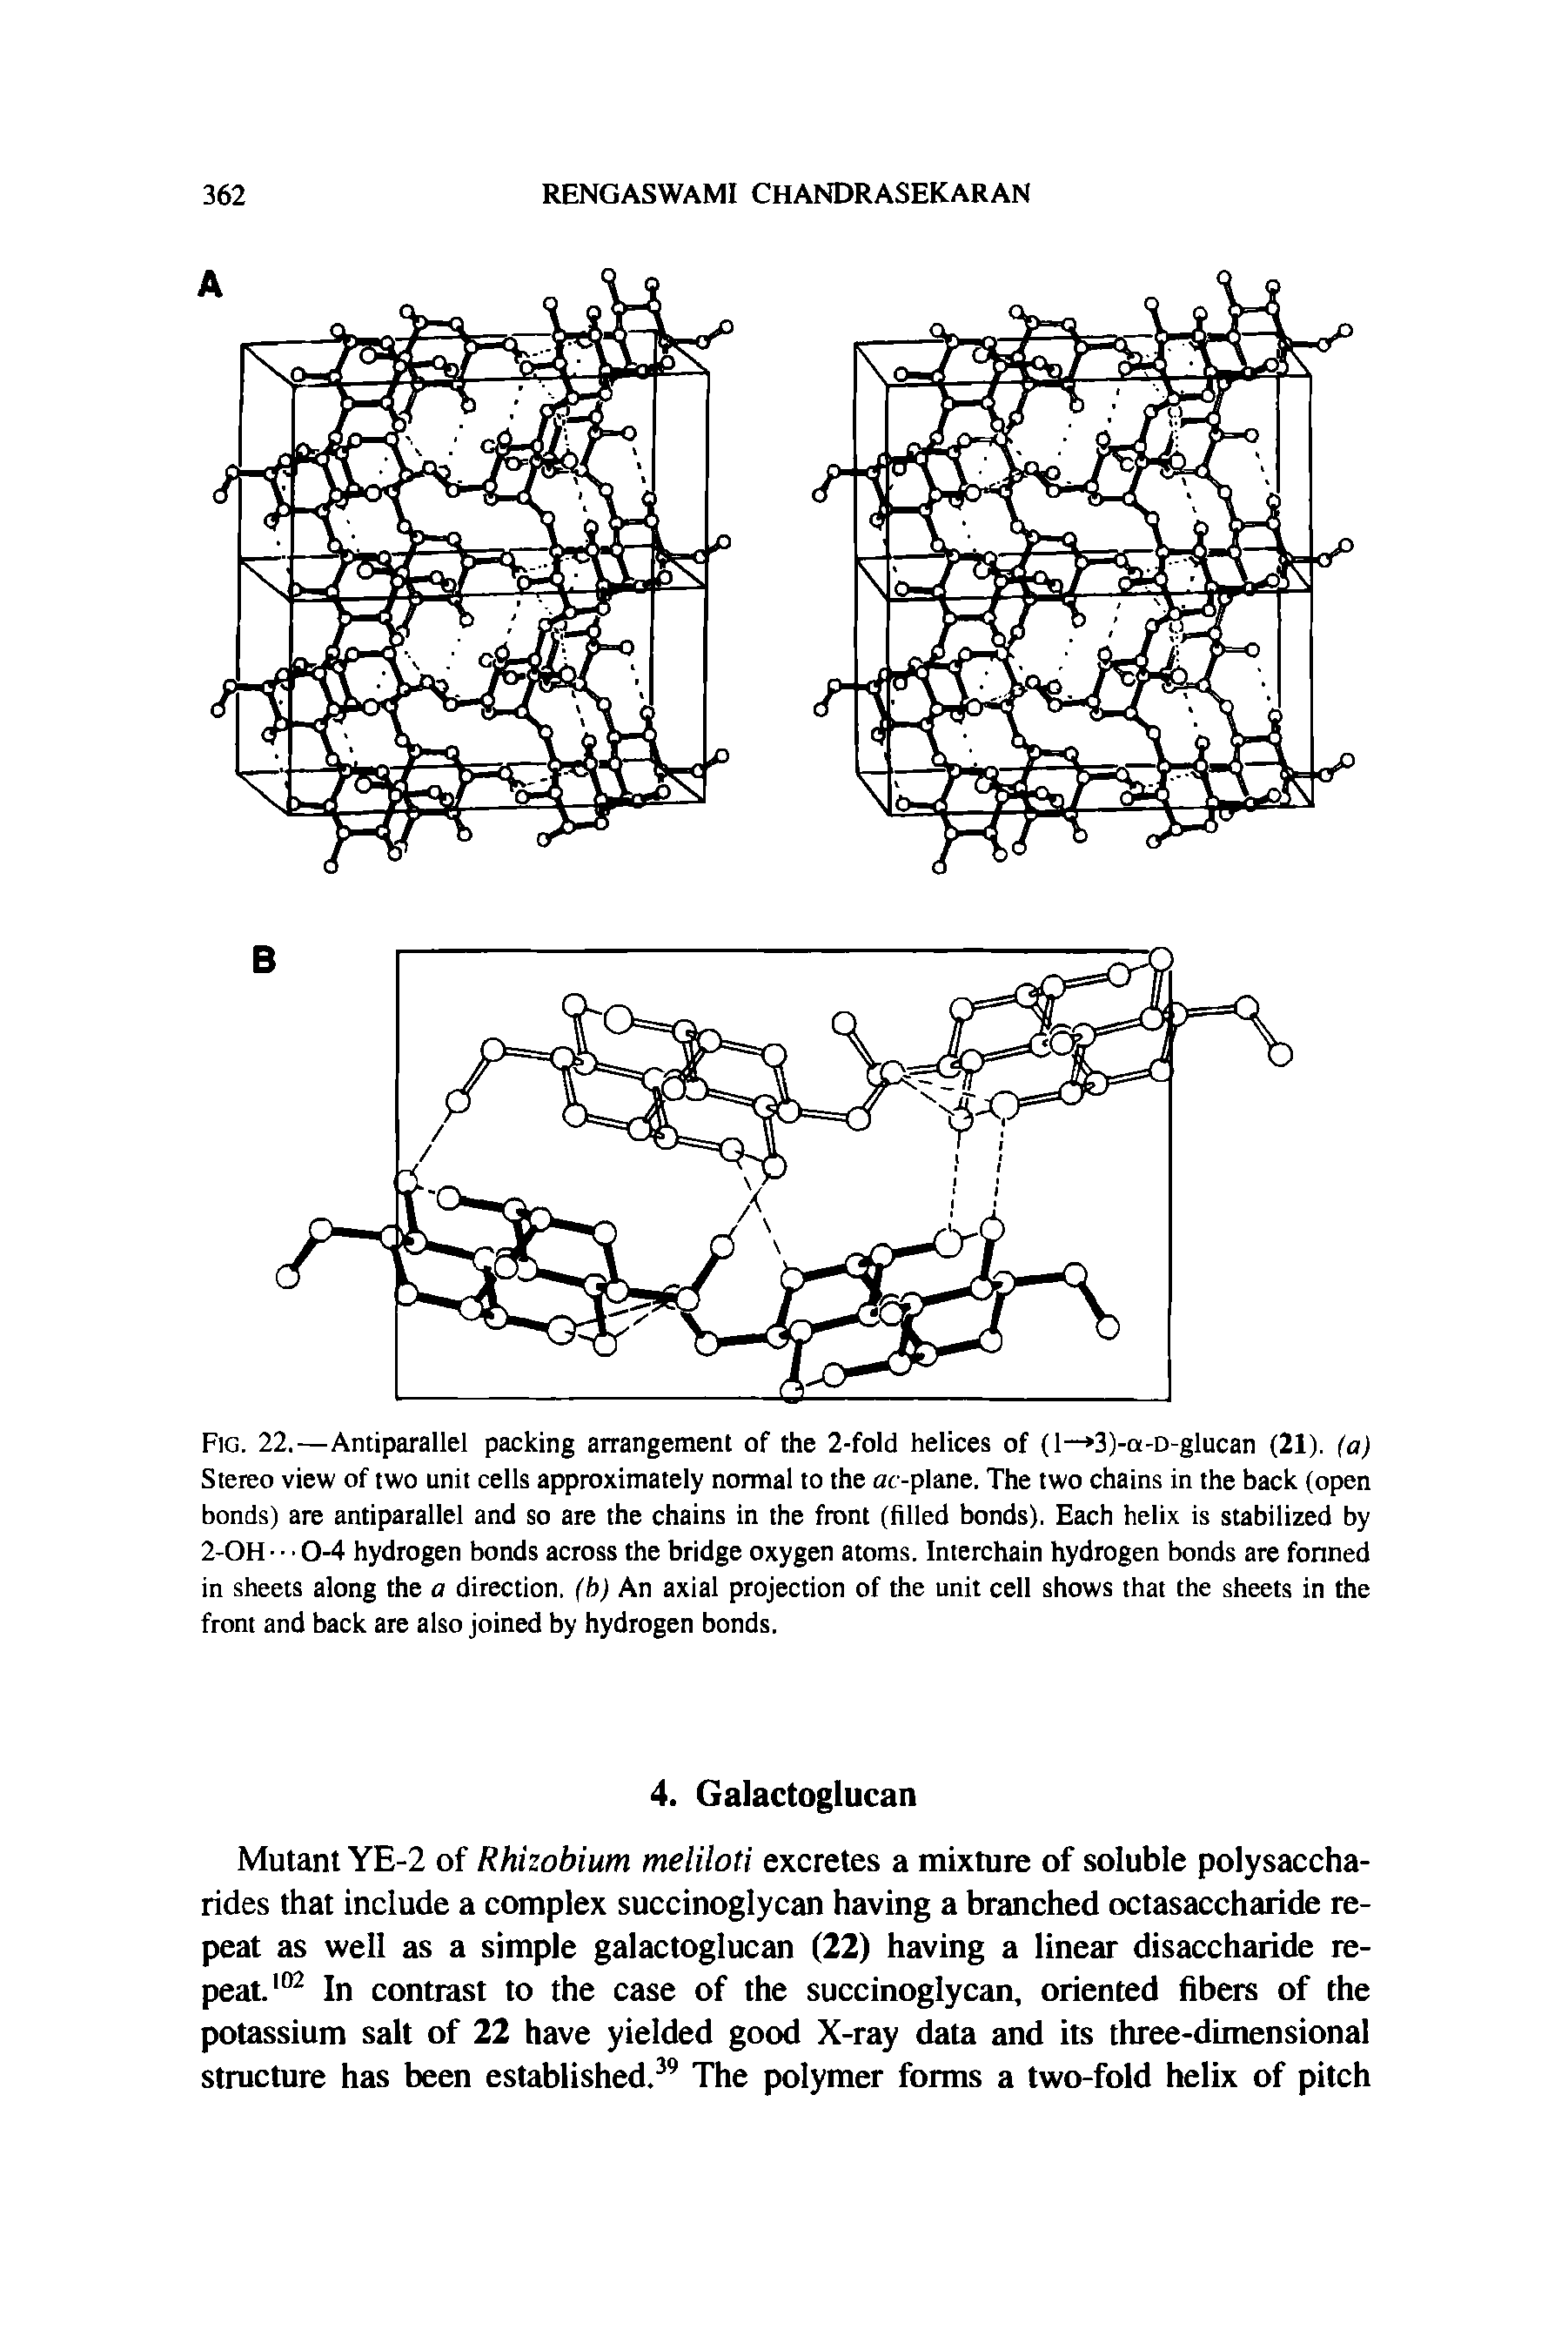 Fig. 22.—Antiparallel packing arrangement of the 2-fold helices of (1— 3)-a-D-glucan (21). (a) Stereo view of two unit cells approximately normal to the aoplane. The two chains in the back (open bonds) are antiparallel and so are the chains in the front (filled bonds). Each helix is stabilized by 2-OH 0-4 hydrogen bonds across the bridge oxygen atoms. Interchain hydrogen bonds are formed in sheets along the a direction, (b) An axial projection of the unit cell shows that the sheets in the front and back are also joined by hydrogen bonds.